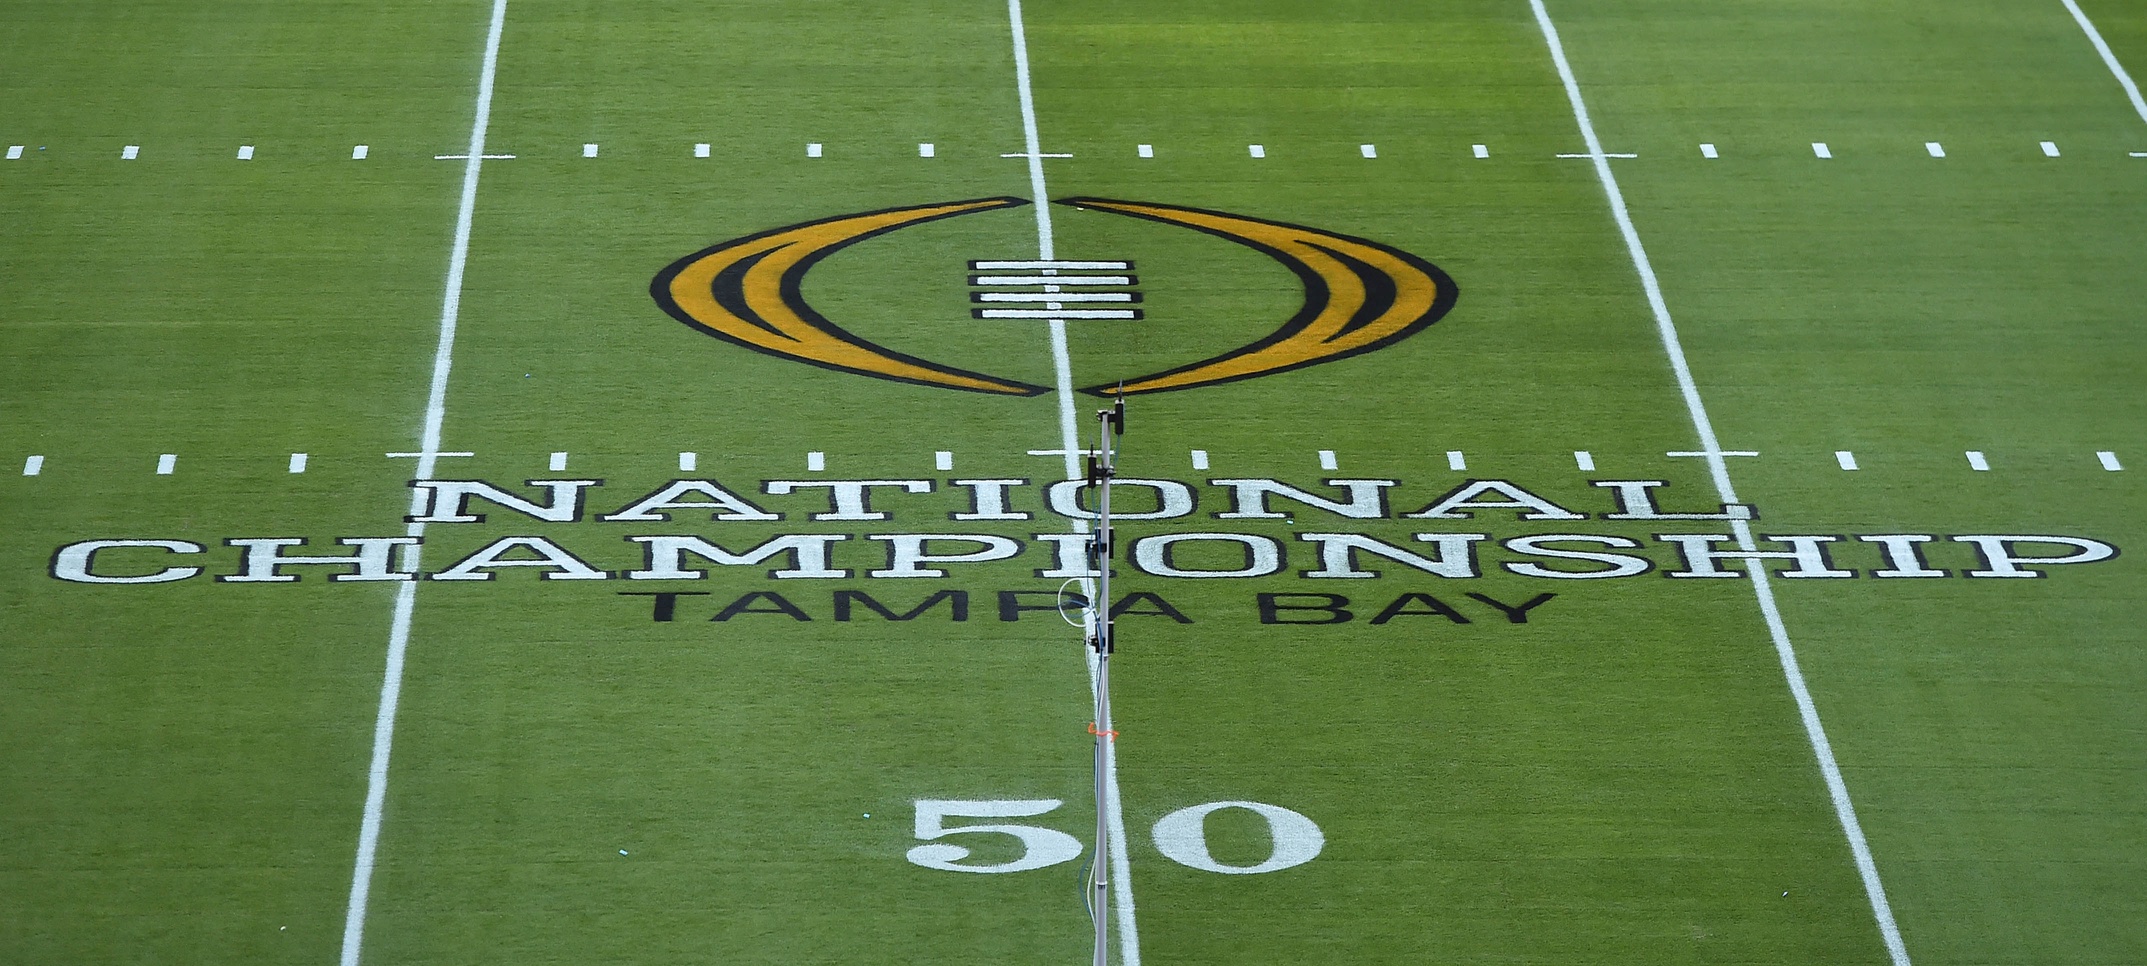 Jan 9, 2017; Tampa, FL, USA; A general view of the logo on the field before the 2017 College Football Playoff National Championship Game between the Alabama Crimson Tide and the Clemson Tigers at Raymond James Stadium. Mandatory Credit: Jasen Vinlove-USA TODAY Sports